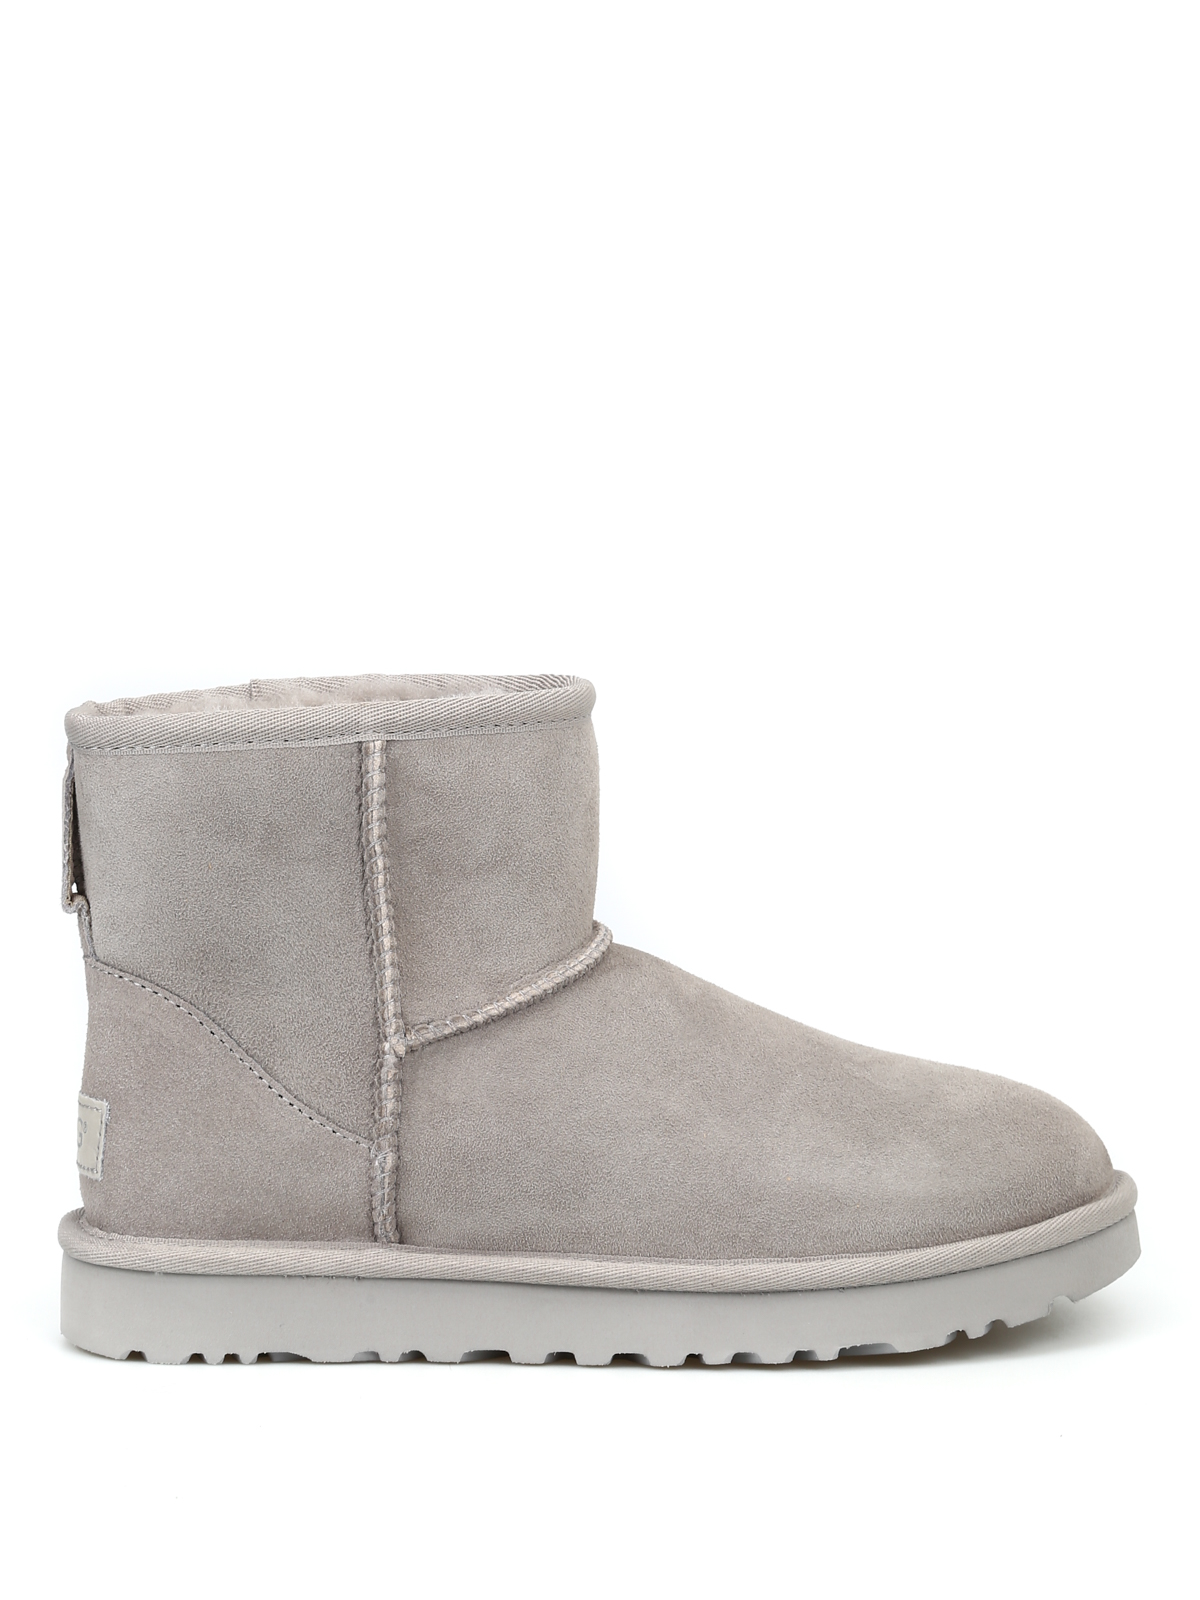 ugg classic mini ankle boots